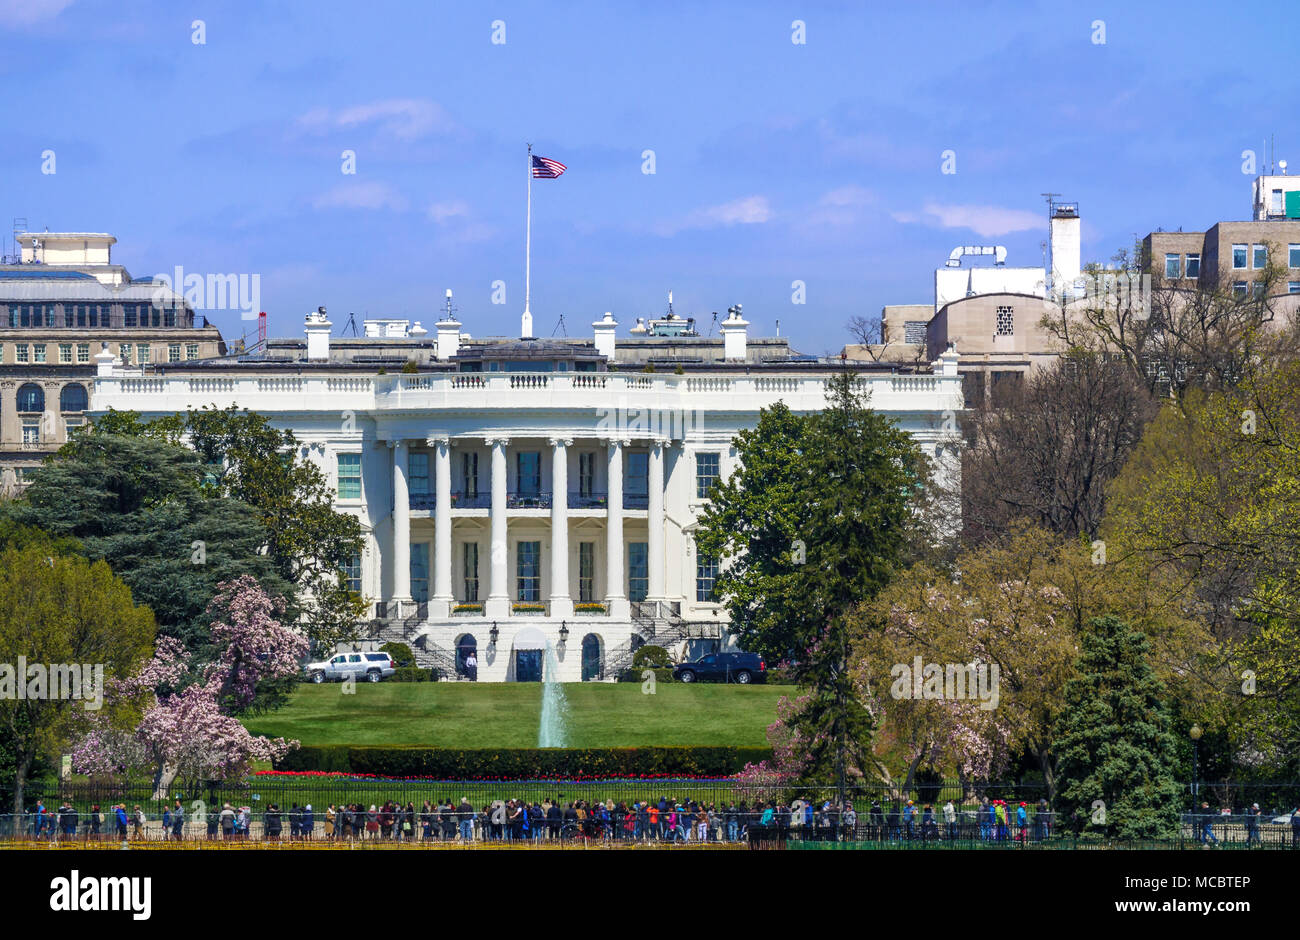 The White House viewed from the South Lawn on a bright day - Washington D.C., USA Stock Photo